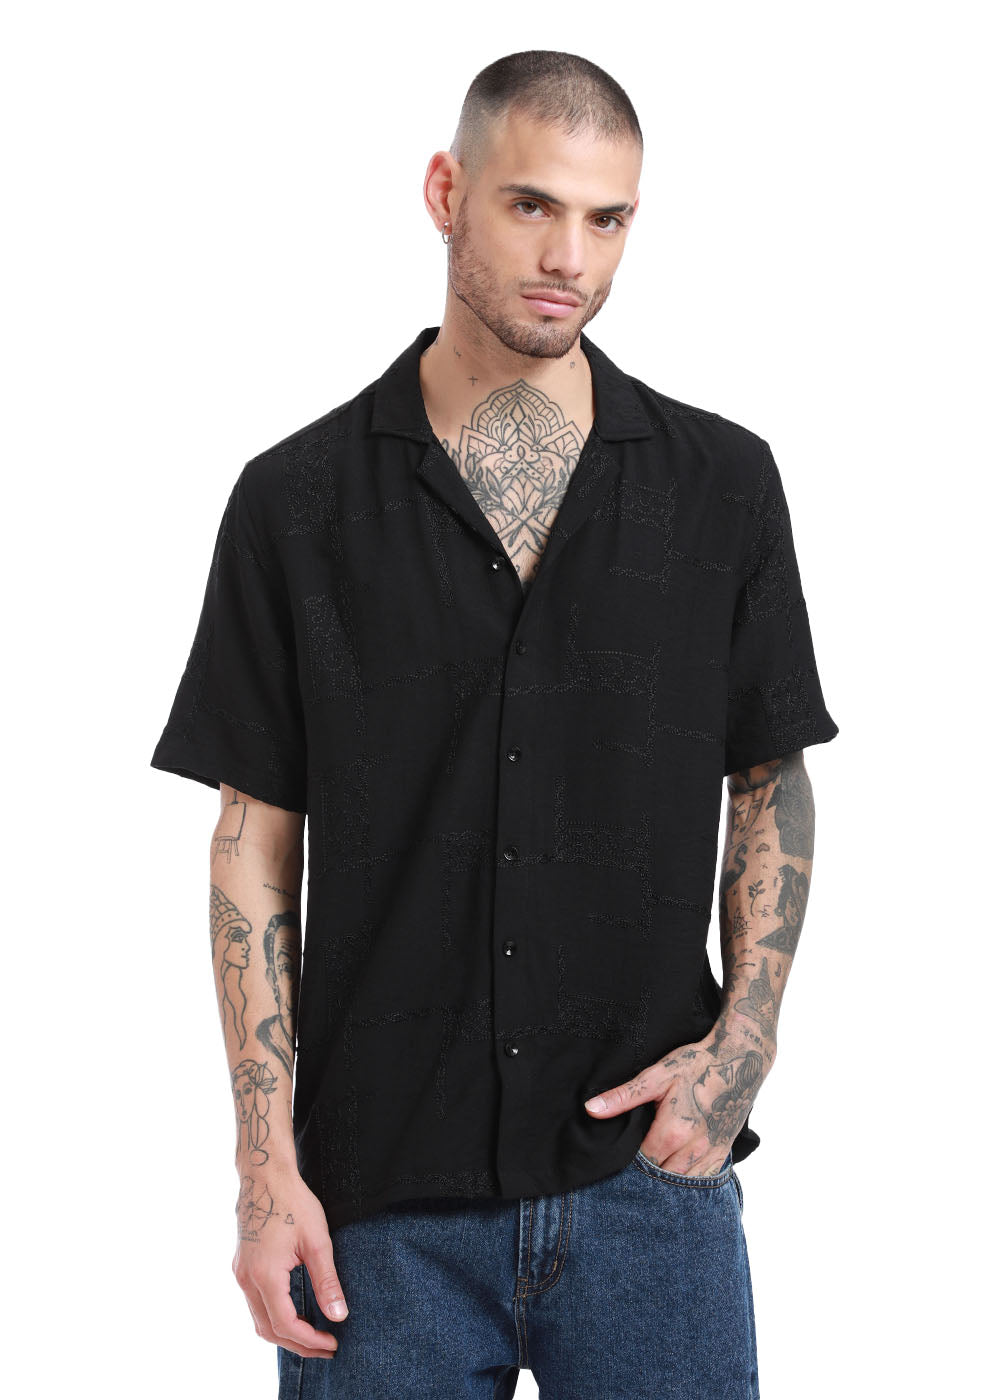 Carbon Black Embroidered Shirt